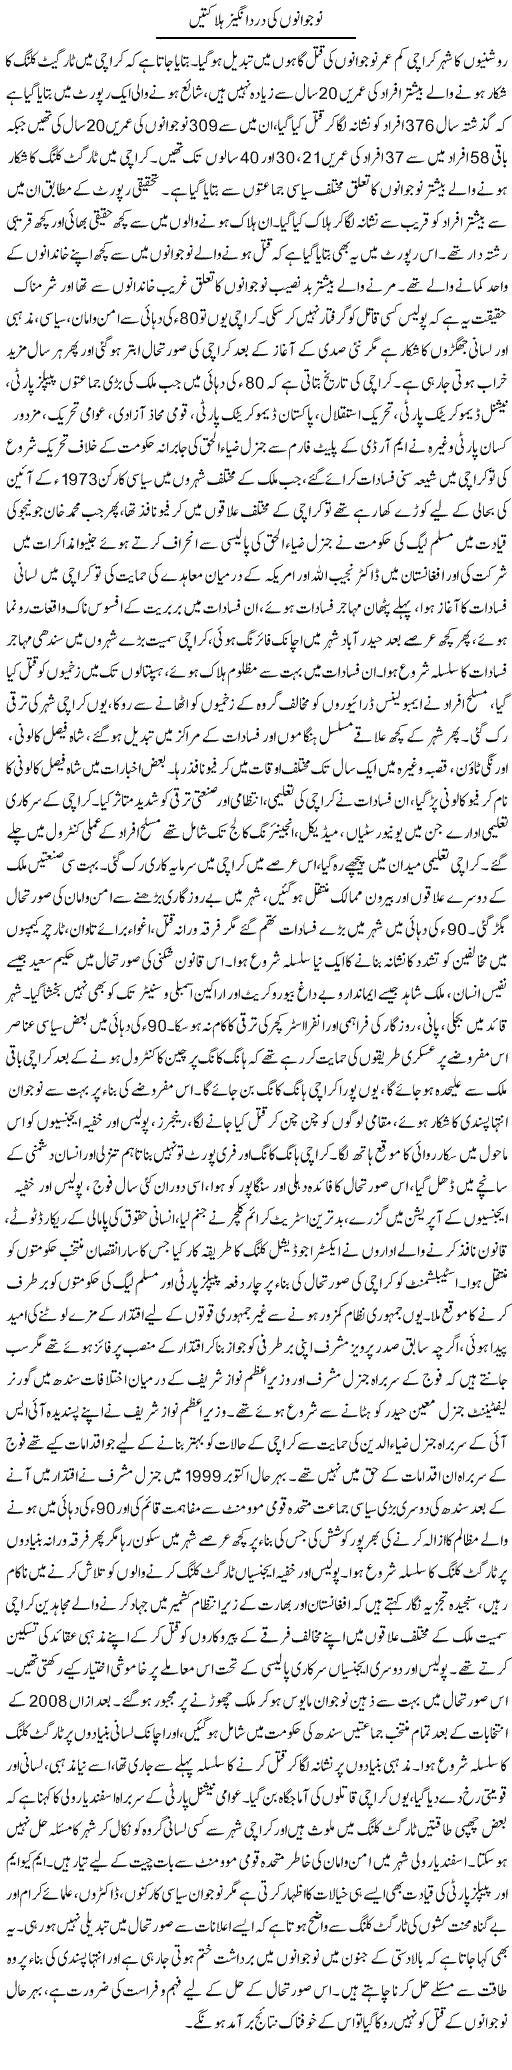 Deaths of Youngsters Express Column Tauseef Ahmed 13 February 2011